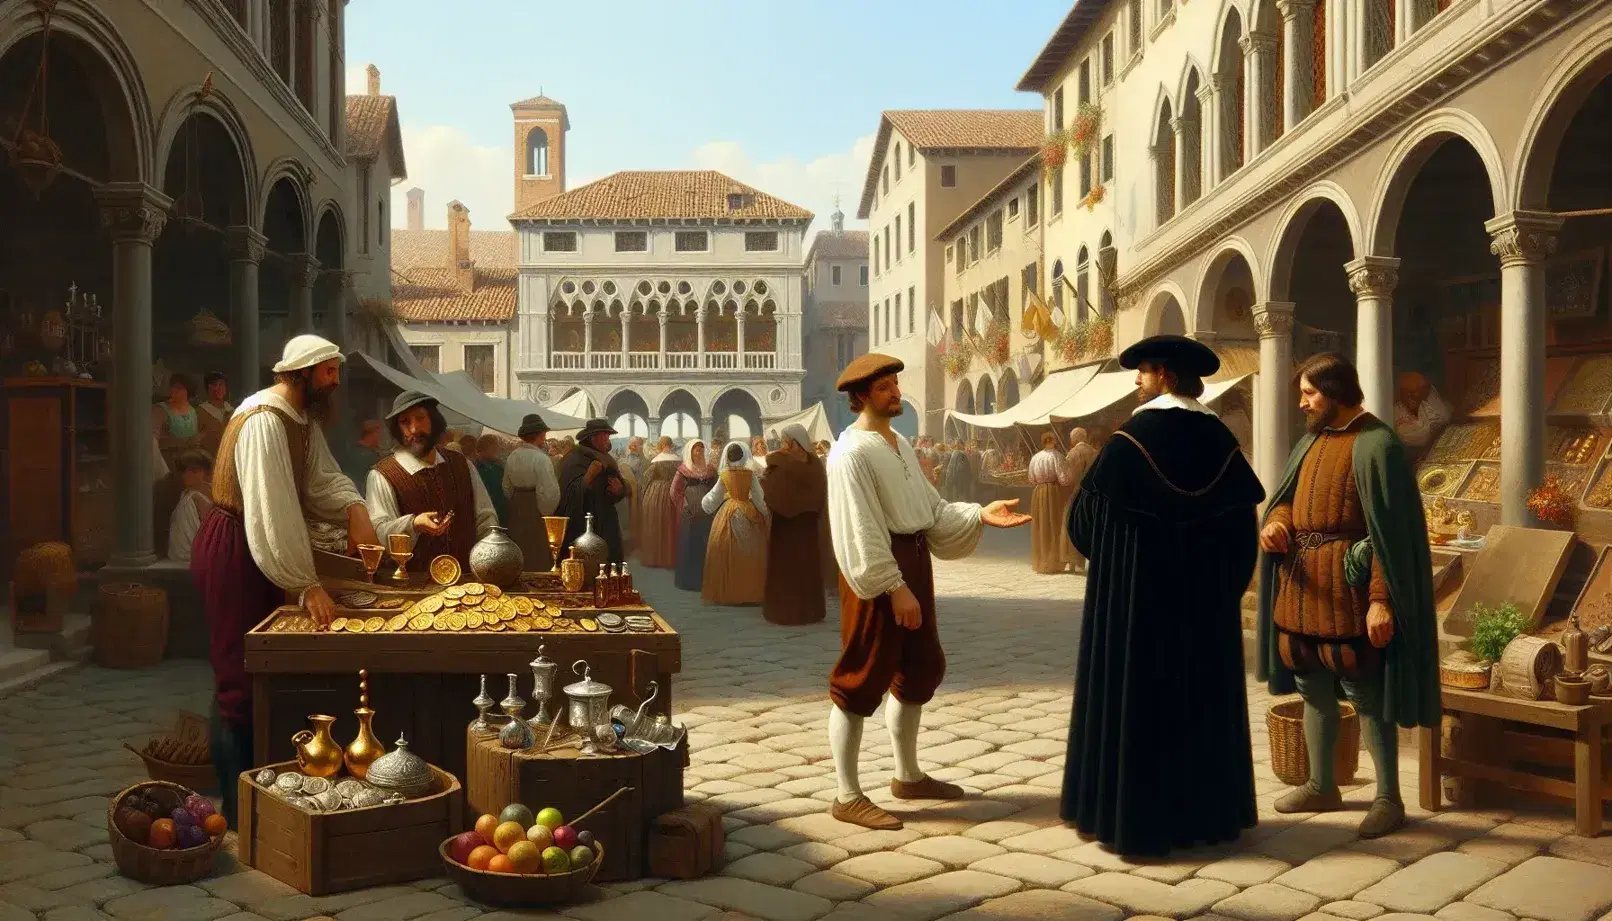 Venetian market scene from the 16th-17th century with merchants, a coin seller in a flat cap, a law officer in black, townspeople, and historical architecture.